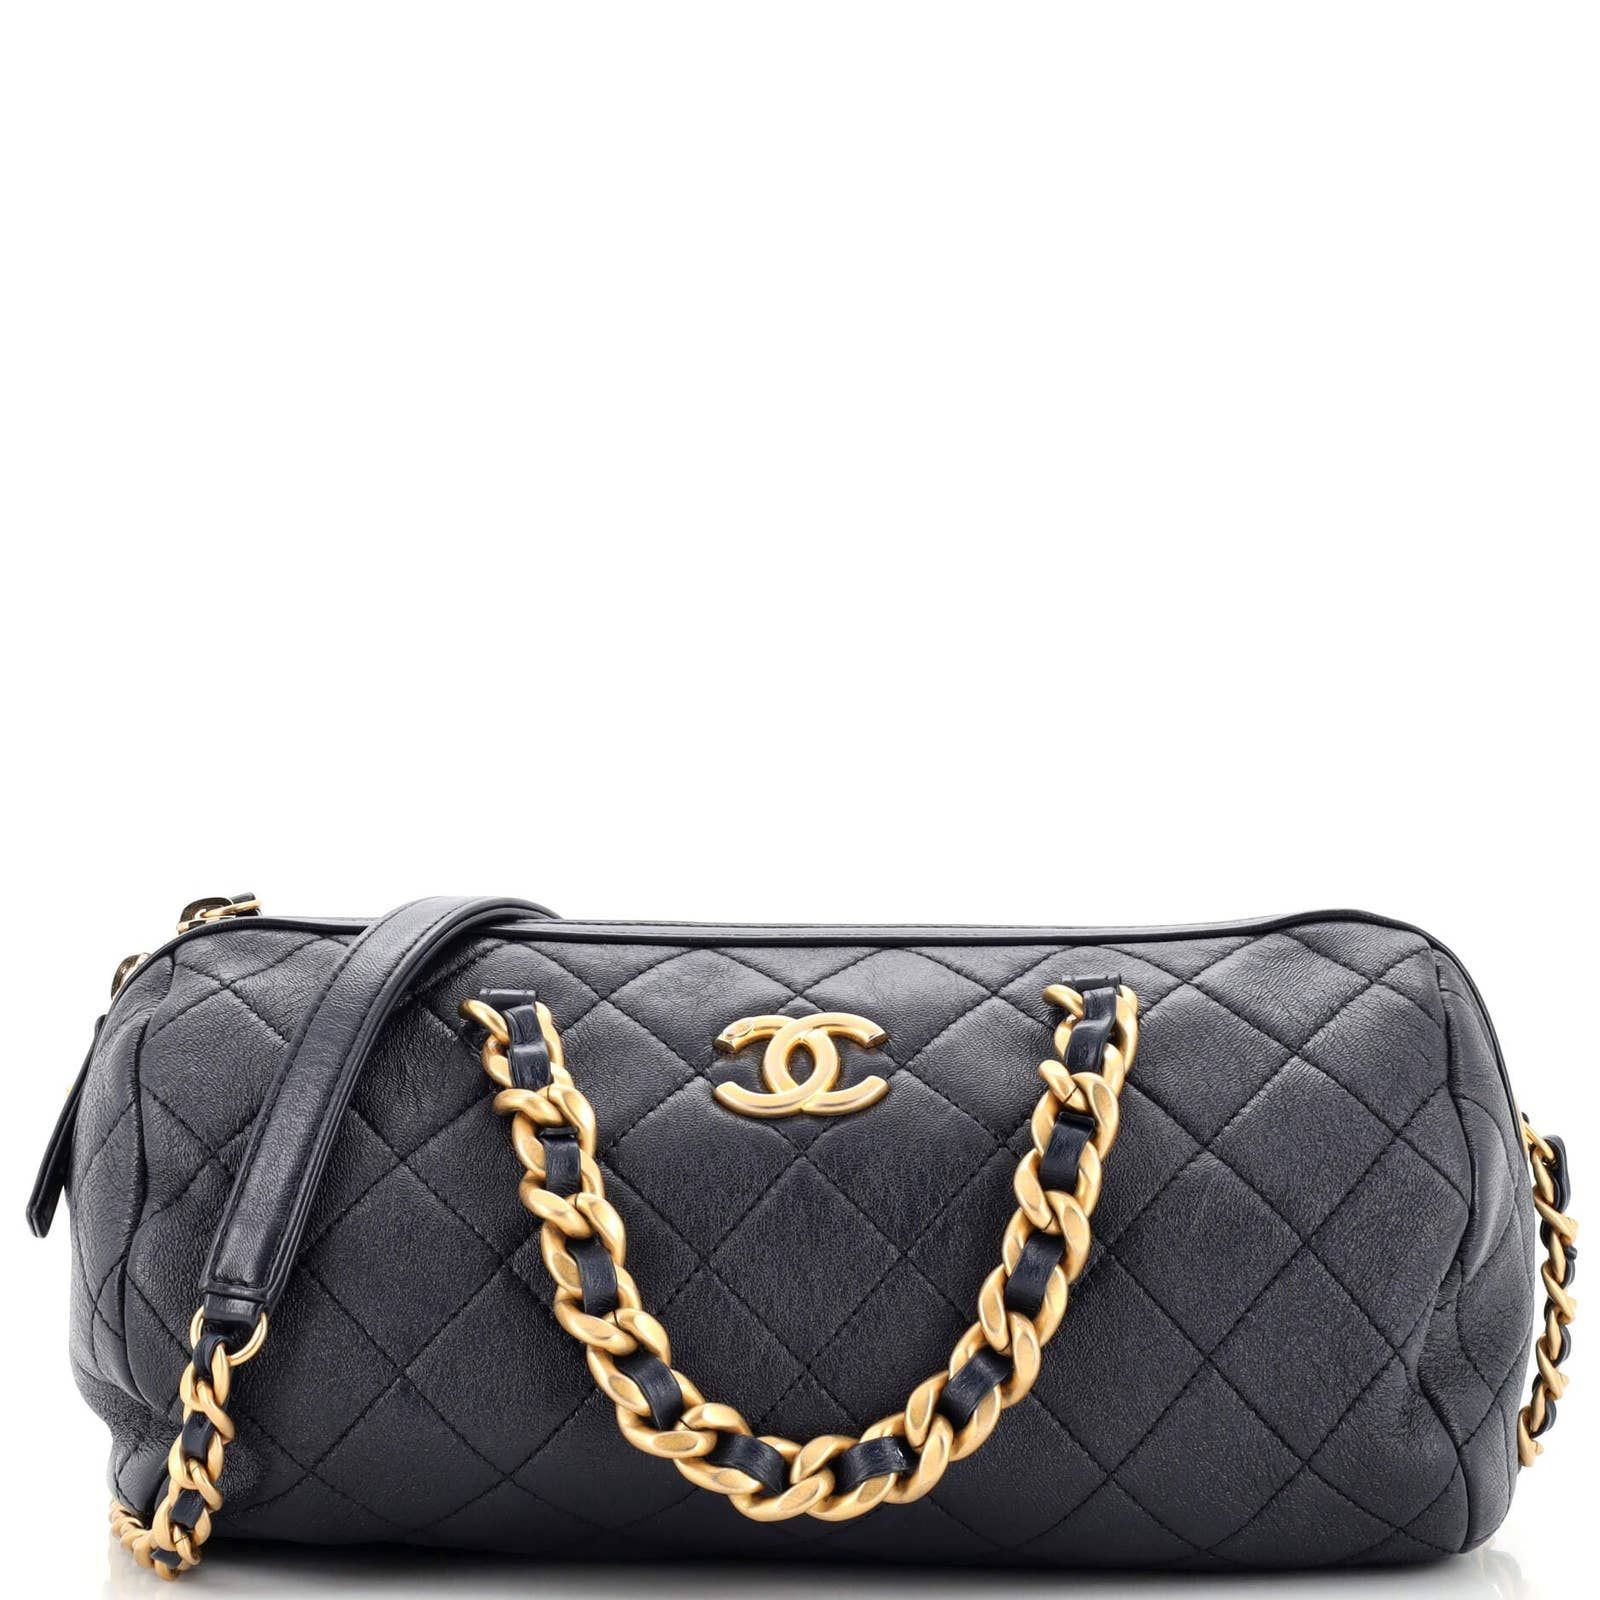 Chanel Fashion Therapy Bowling Bag Quilted Shiny Lambskin Medium